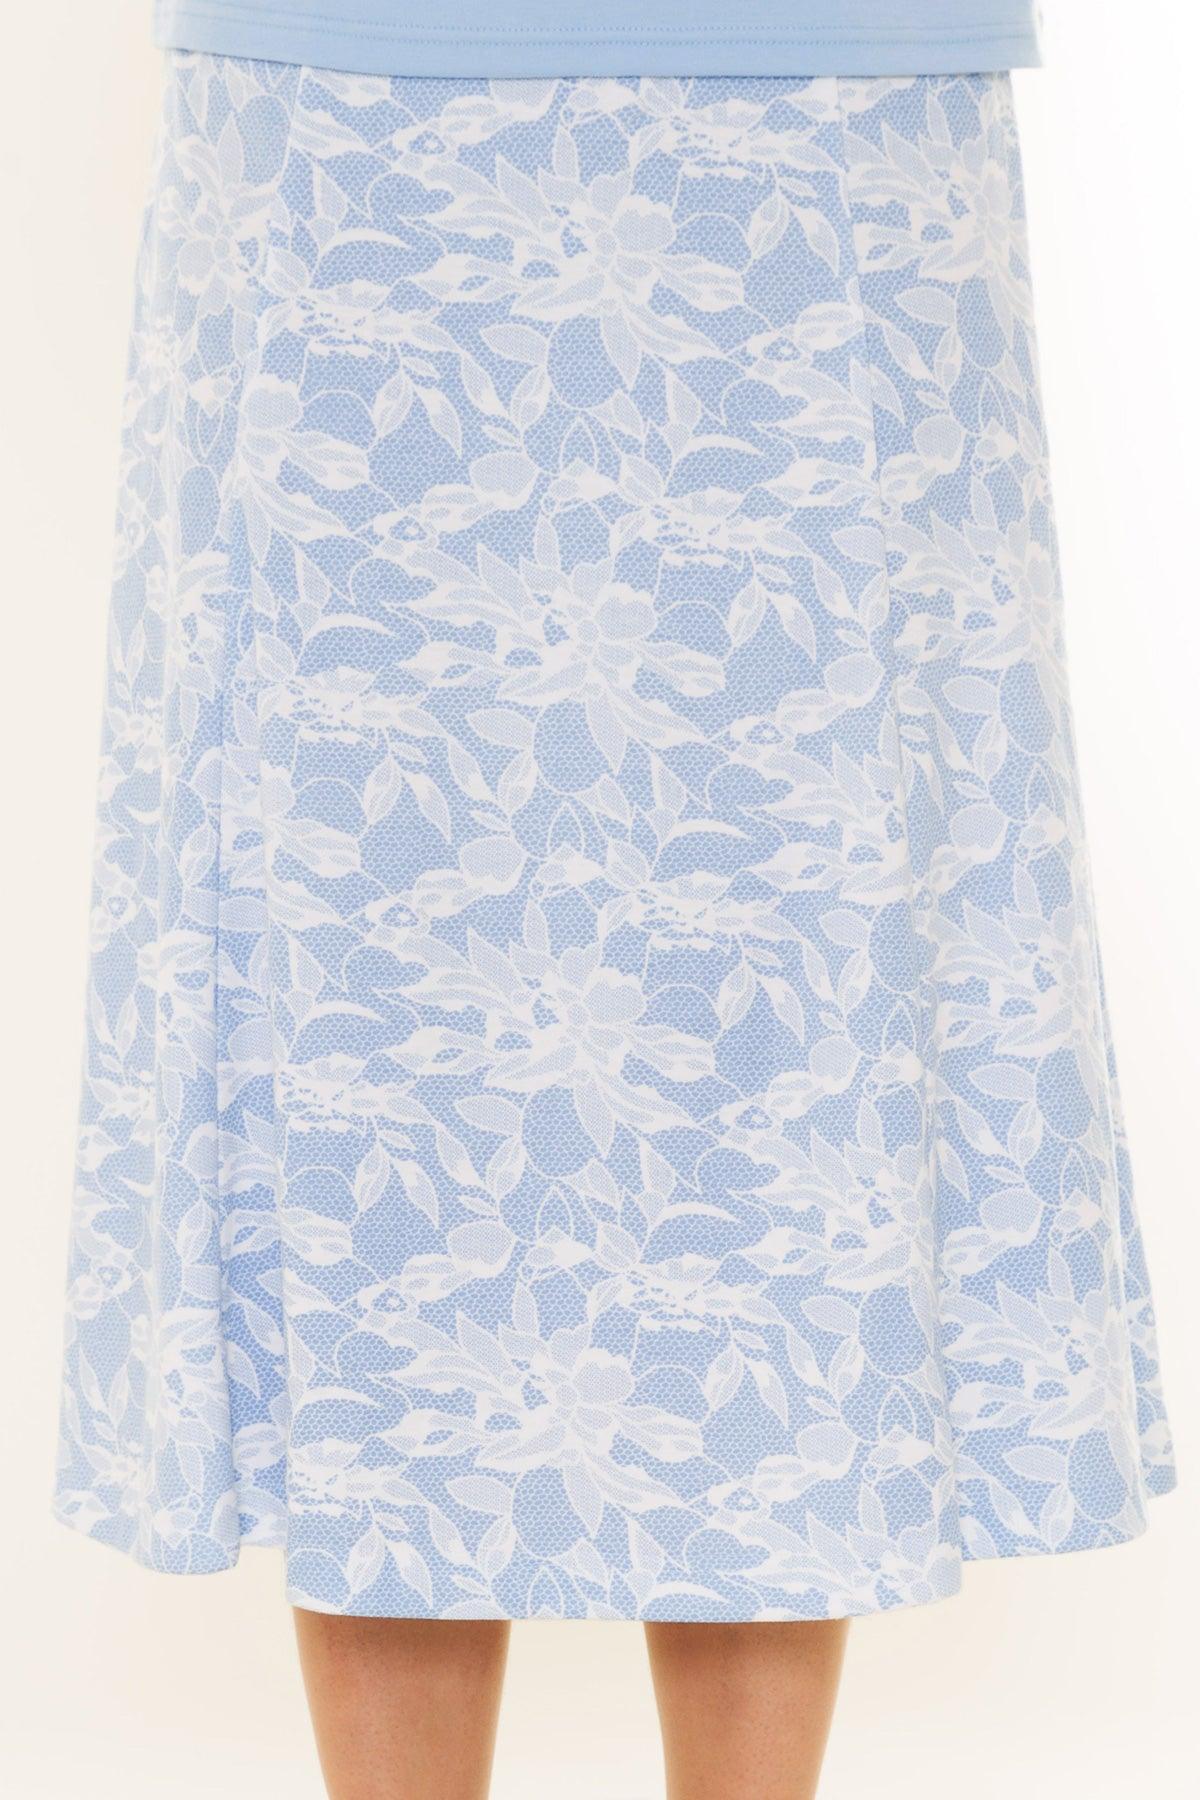 Poppy Lace Print Skirt - Carr & Westley